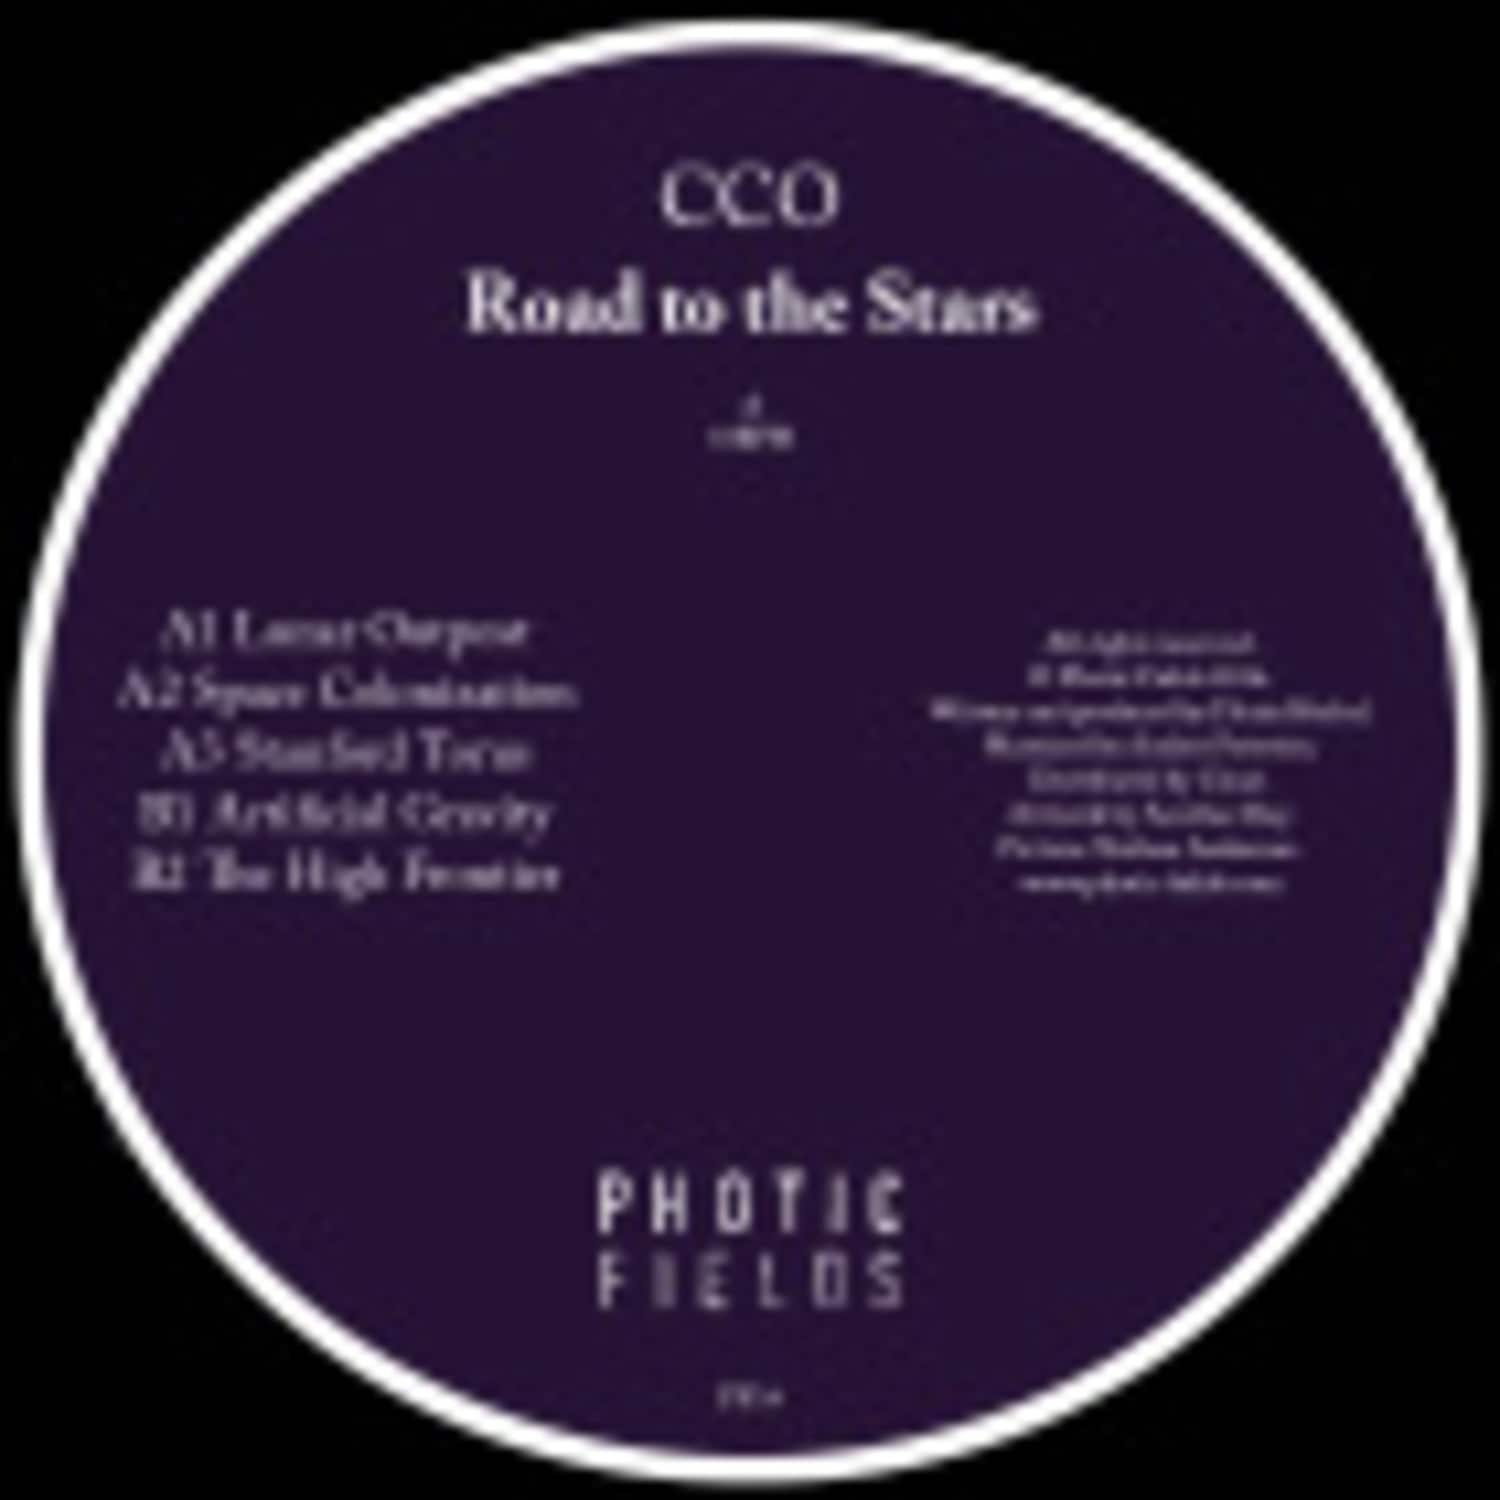 CCO - ROAD TO THE STARS